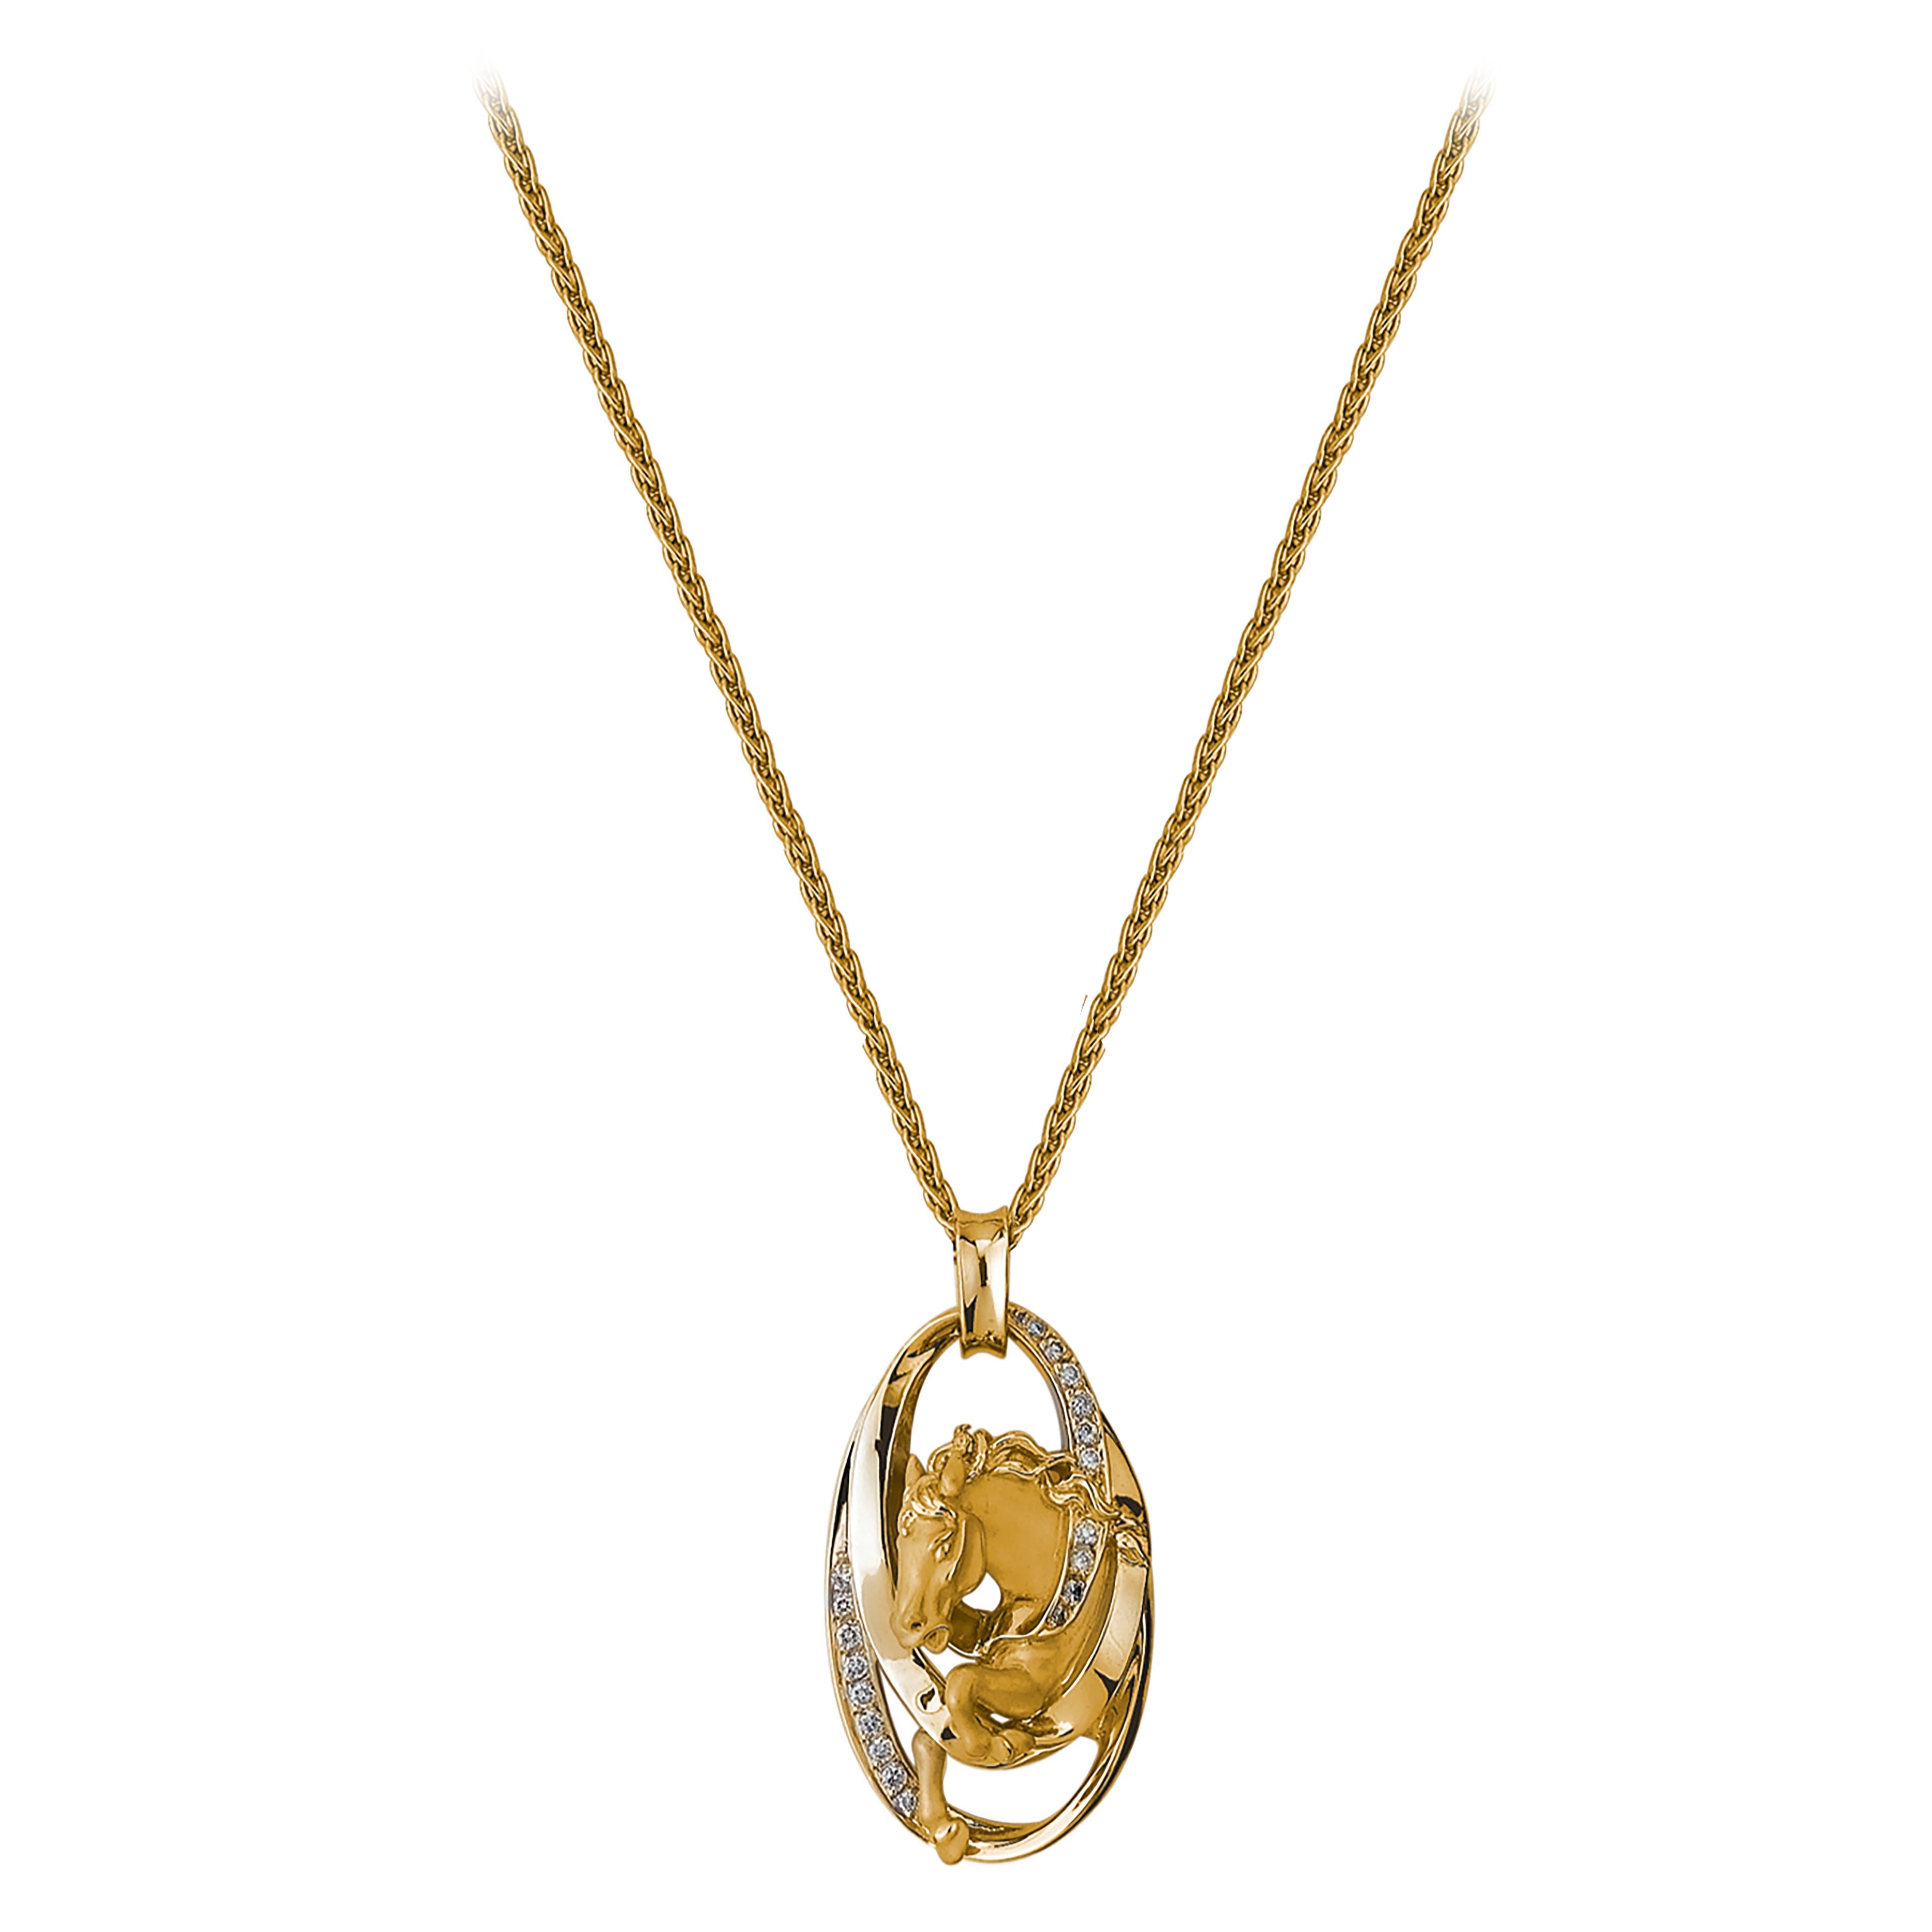 Signed by Carrera y Carrera, a beautiful piece of art crafted in 18K Yellow Gold with 0.15 carat round diamonds horse themed pendant. Endless details and high polished adds elegance to the pendant that is best as a gift or wear in any occasion.   